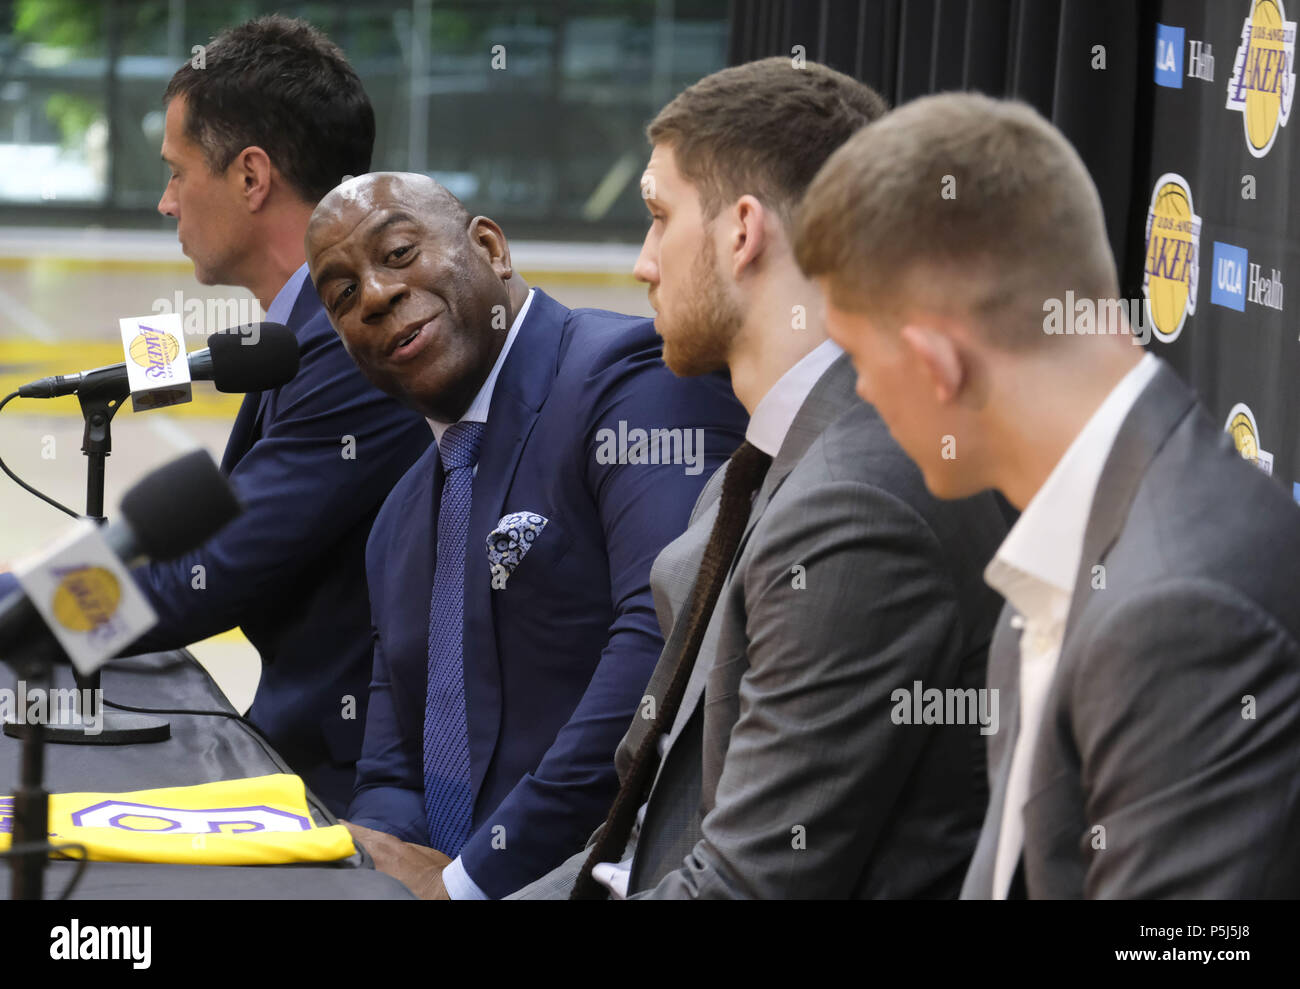 Los Angeles, California, USA. 26th June, 2018. Los Angeles Lakers president of basketball operations, Earvin ''Magic'' Johnson, general manager Rob Pelinka, rookies Moritz Wagner and Sviatoslav Mykhailiuk arrive at an introductory press conference in Los Angeles, Tuesday, June 26, 2018. The Lakers introduce two new draft players, Moritz Wagner, originally from Germany, the 25th pick in the 2018 NBA Draft and guard Sviatoslav Mykhailiuk, originally from Ukraine. Credit: Ringo Chiu/ZUMA Wire/Alamy Live News Stock Photo